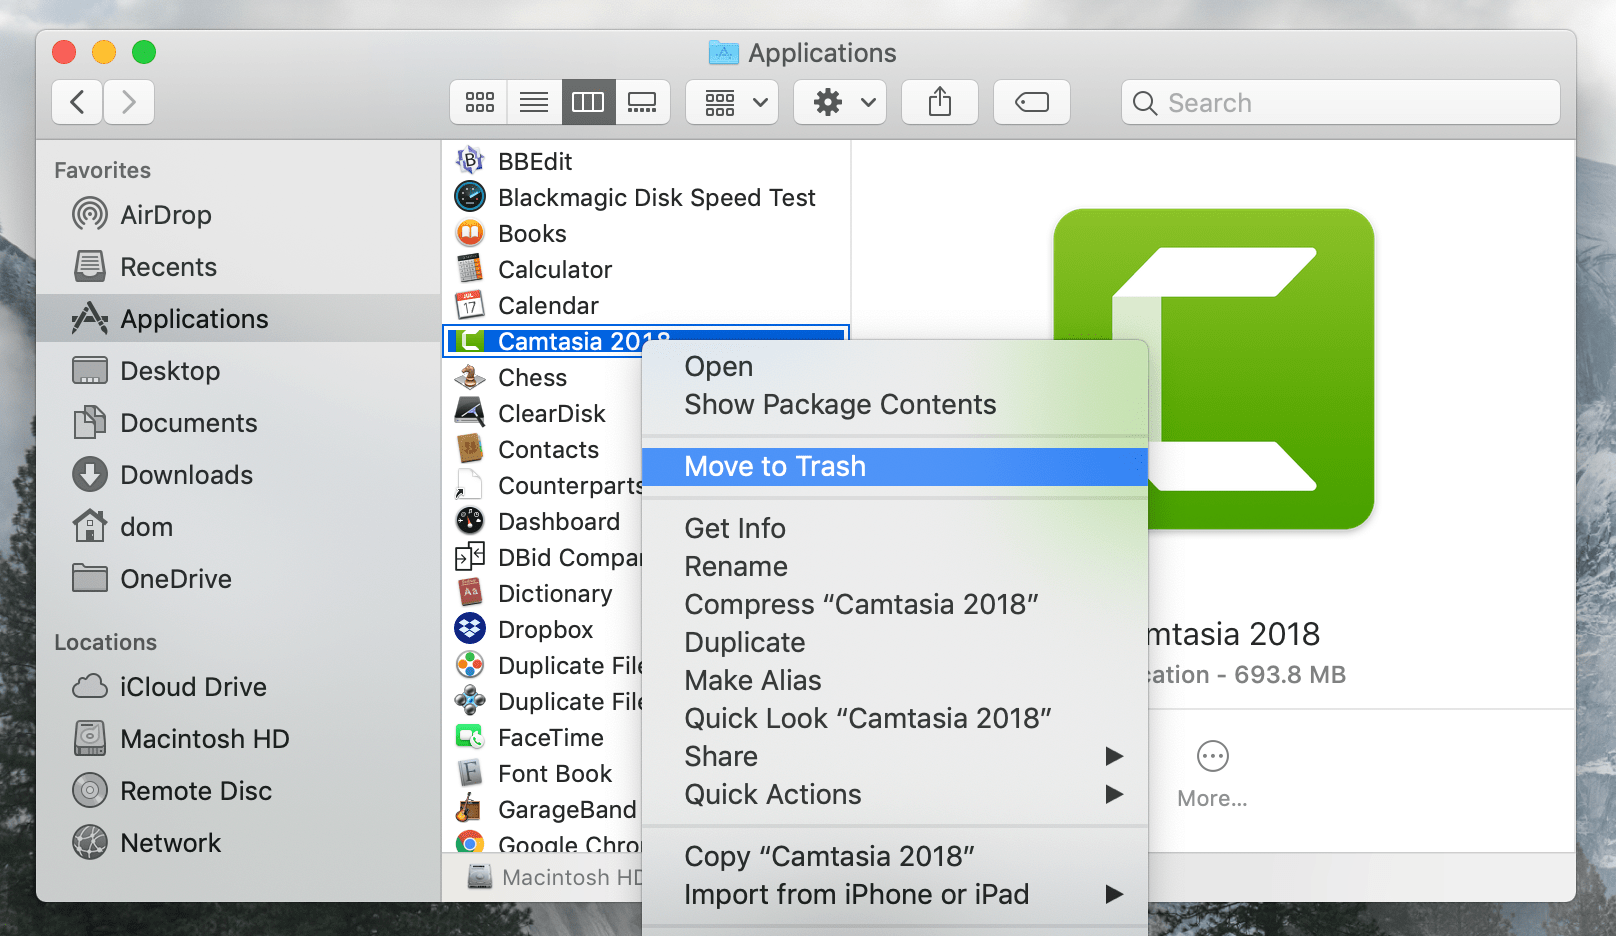 Choosing Move Camtasia to Trash option in Finder context menu